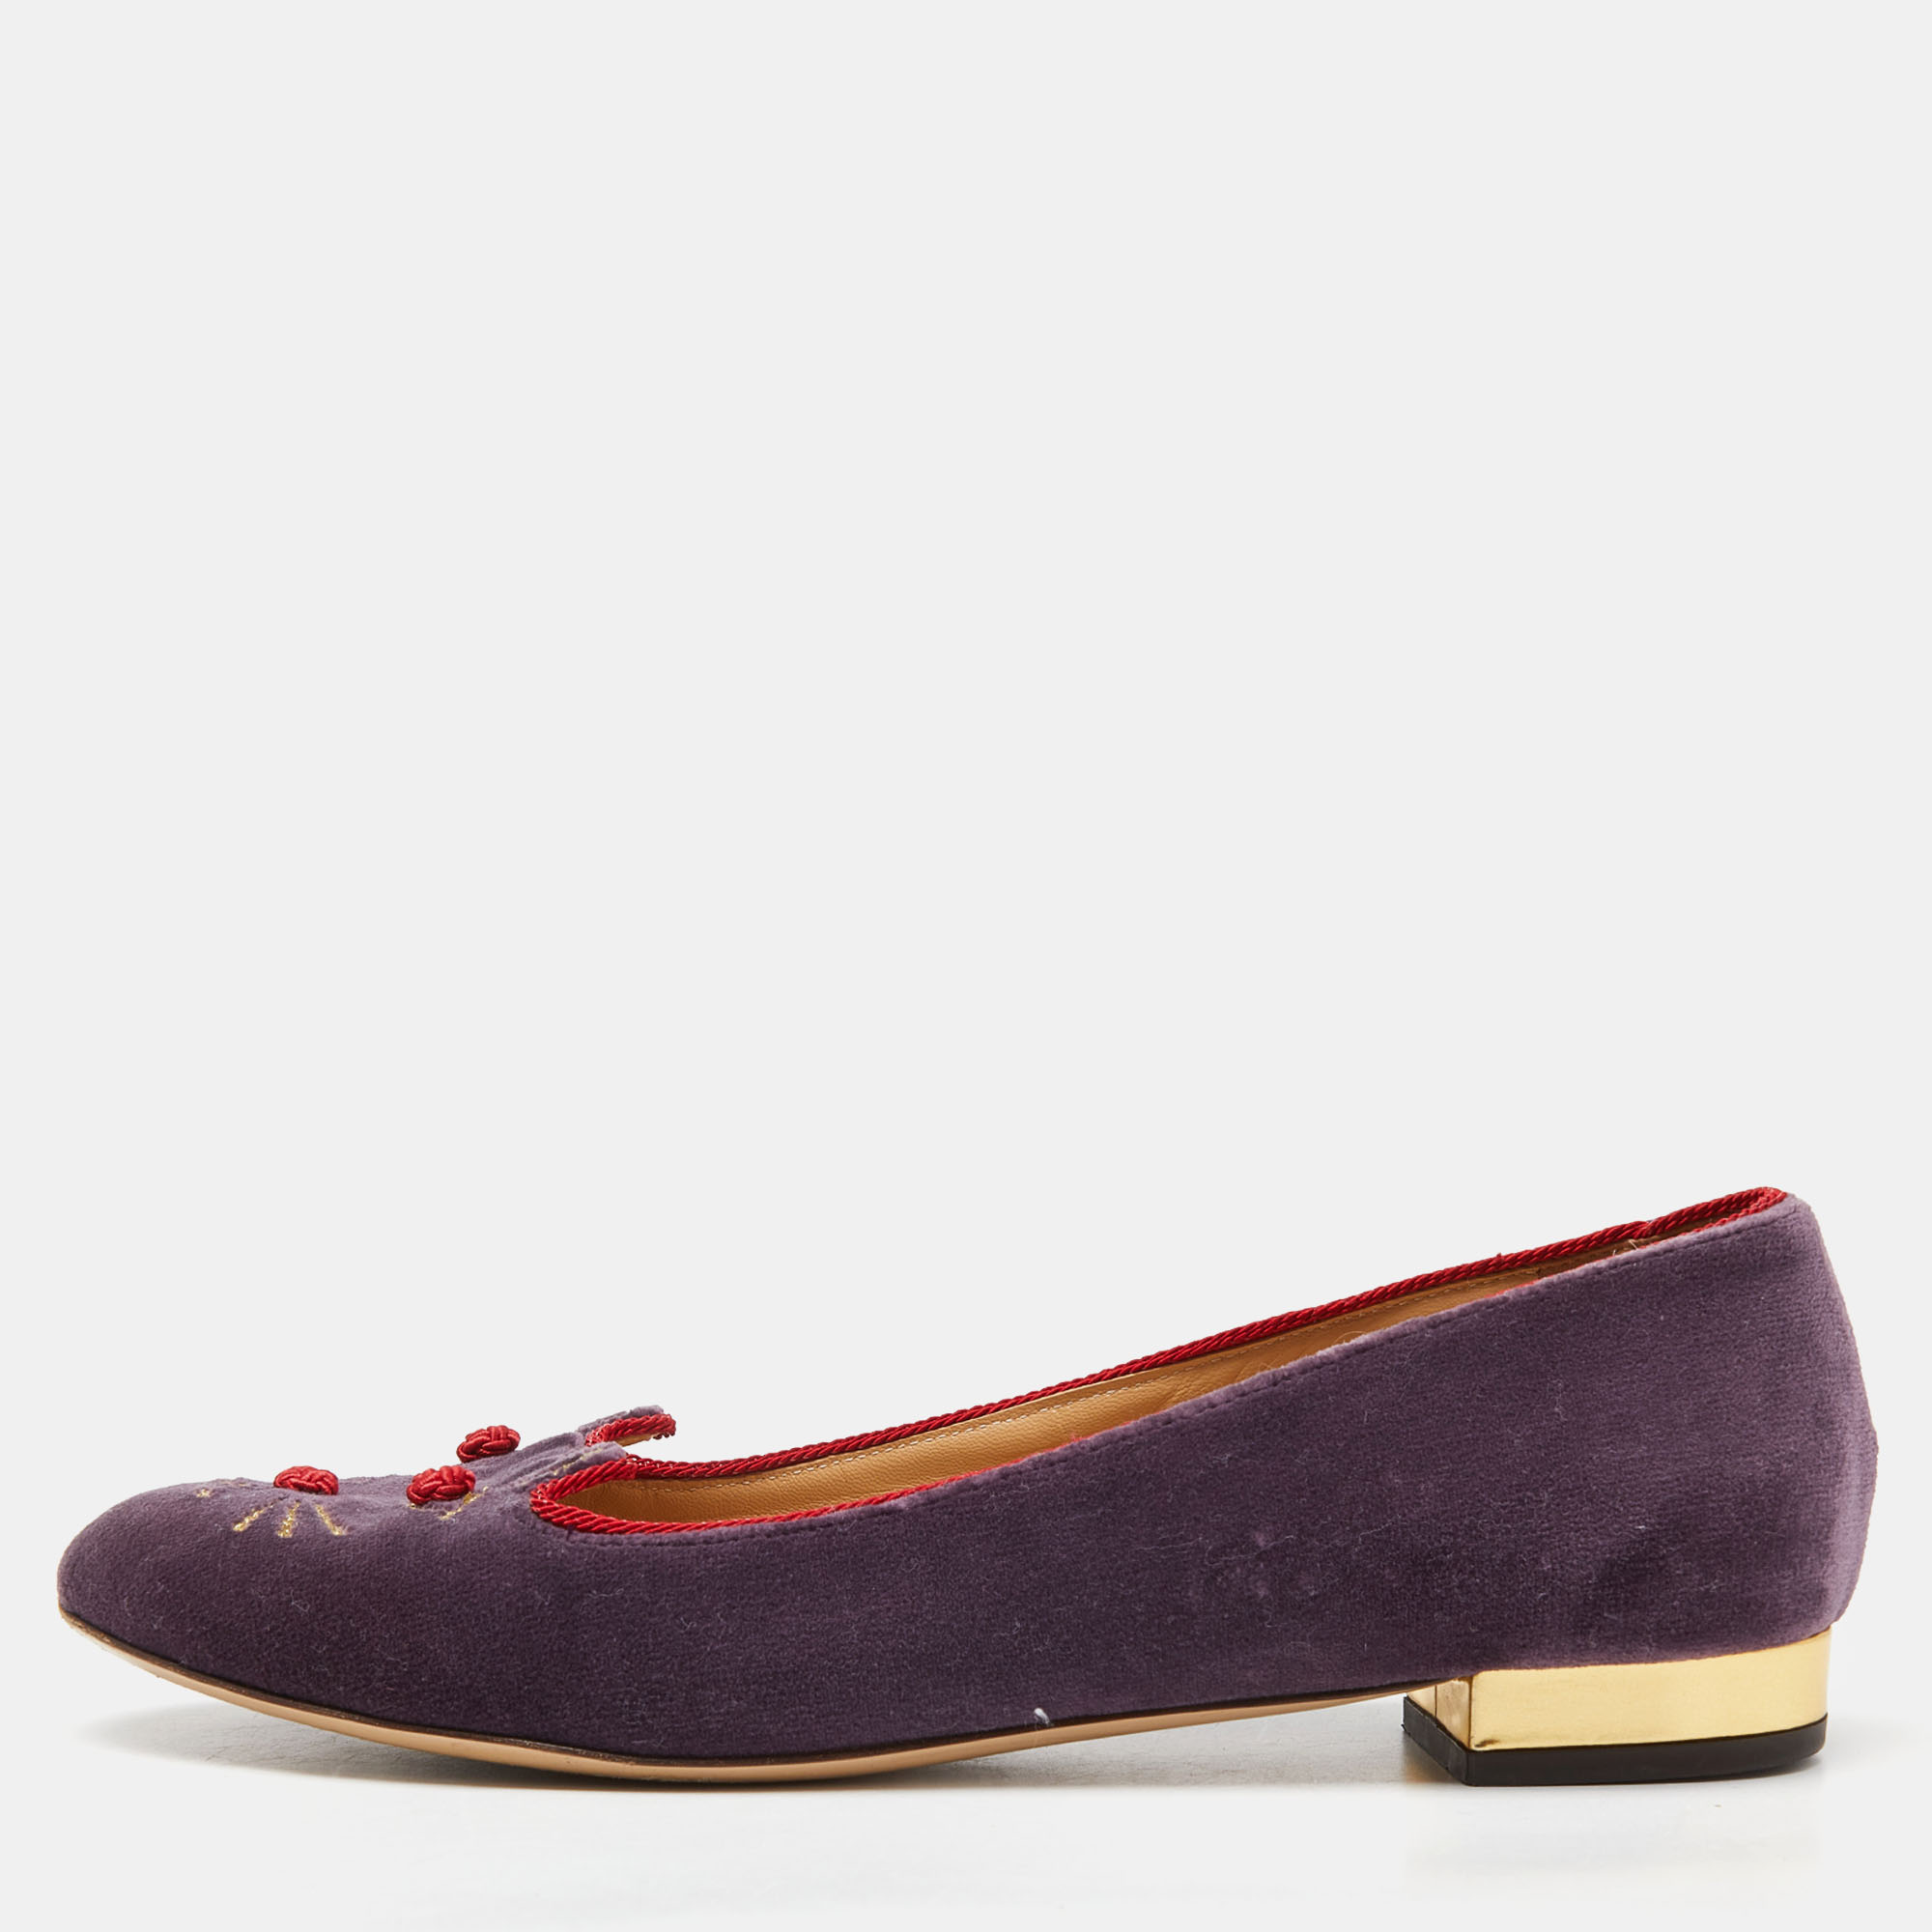 Pre-owned Charlotte Olympia Purple Velvet Emoticats Cheeky Kitty Ballet Flats Size 39.5